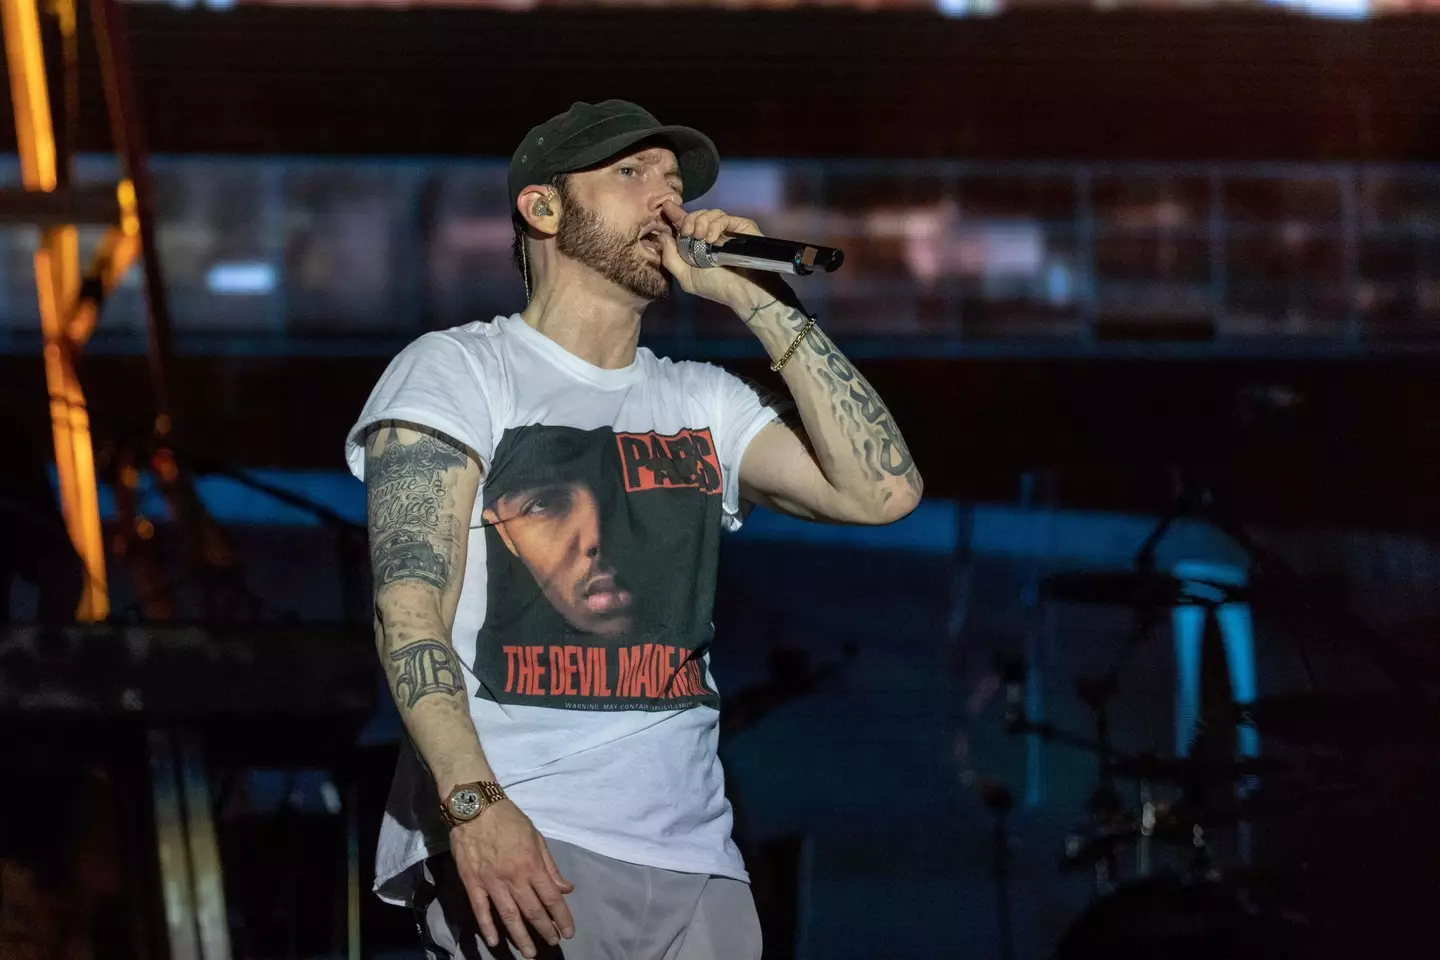 Like many rappers, Eminem's songs have clean and explicit versions, and sometimes unreleased ones.